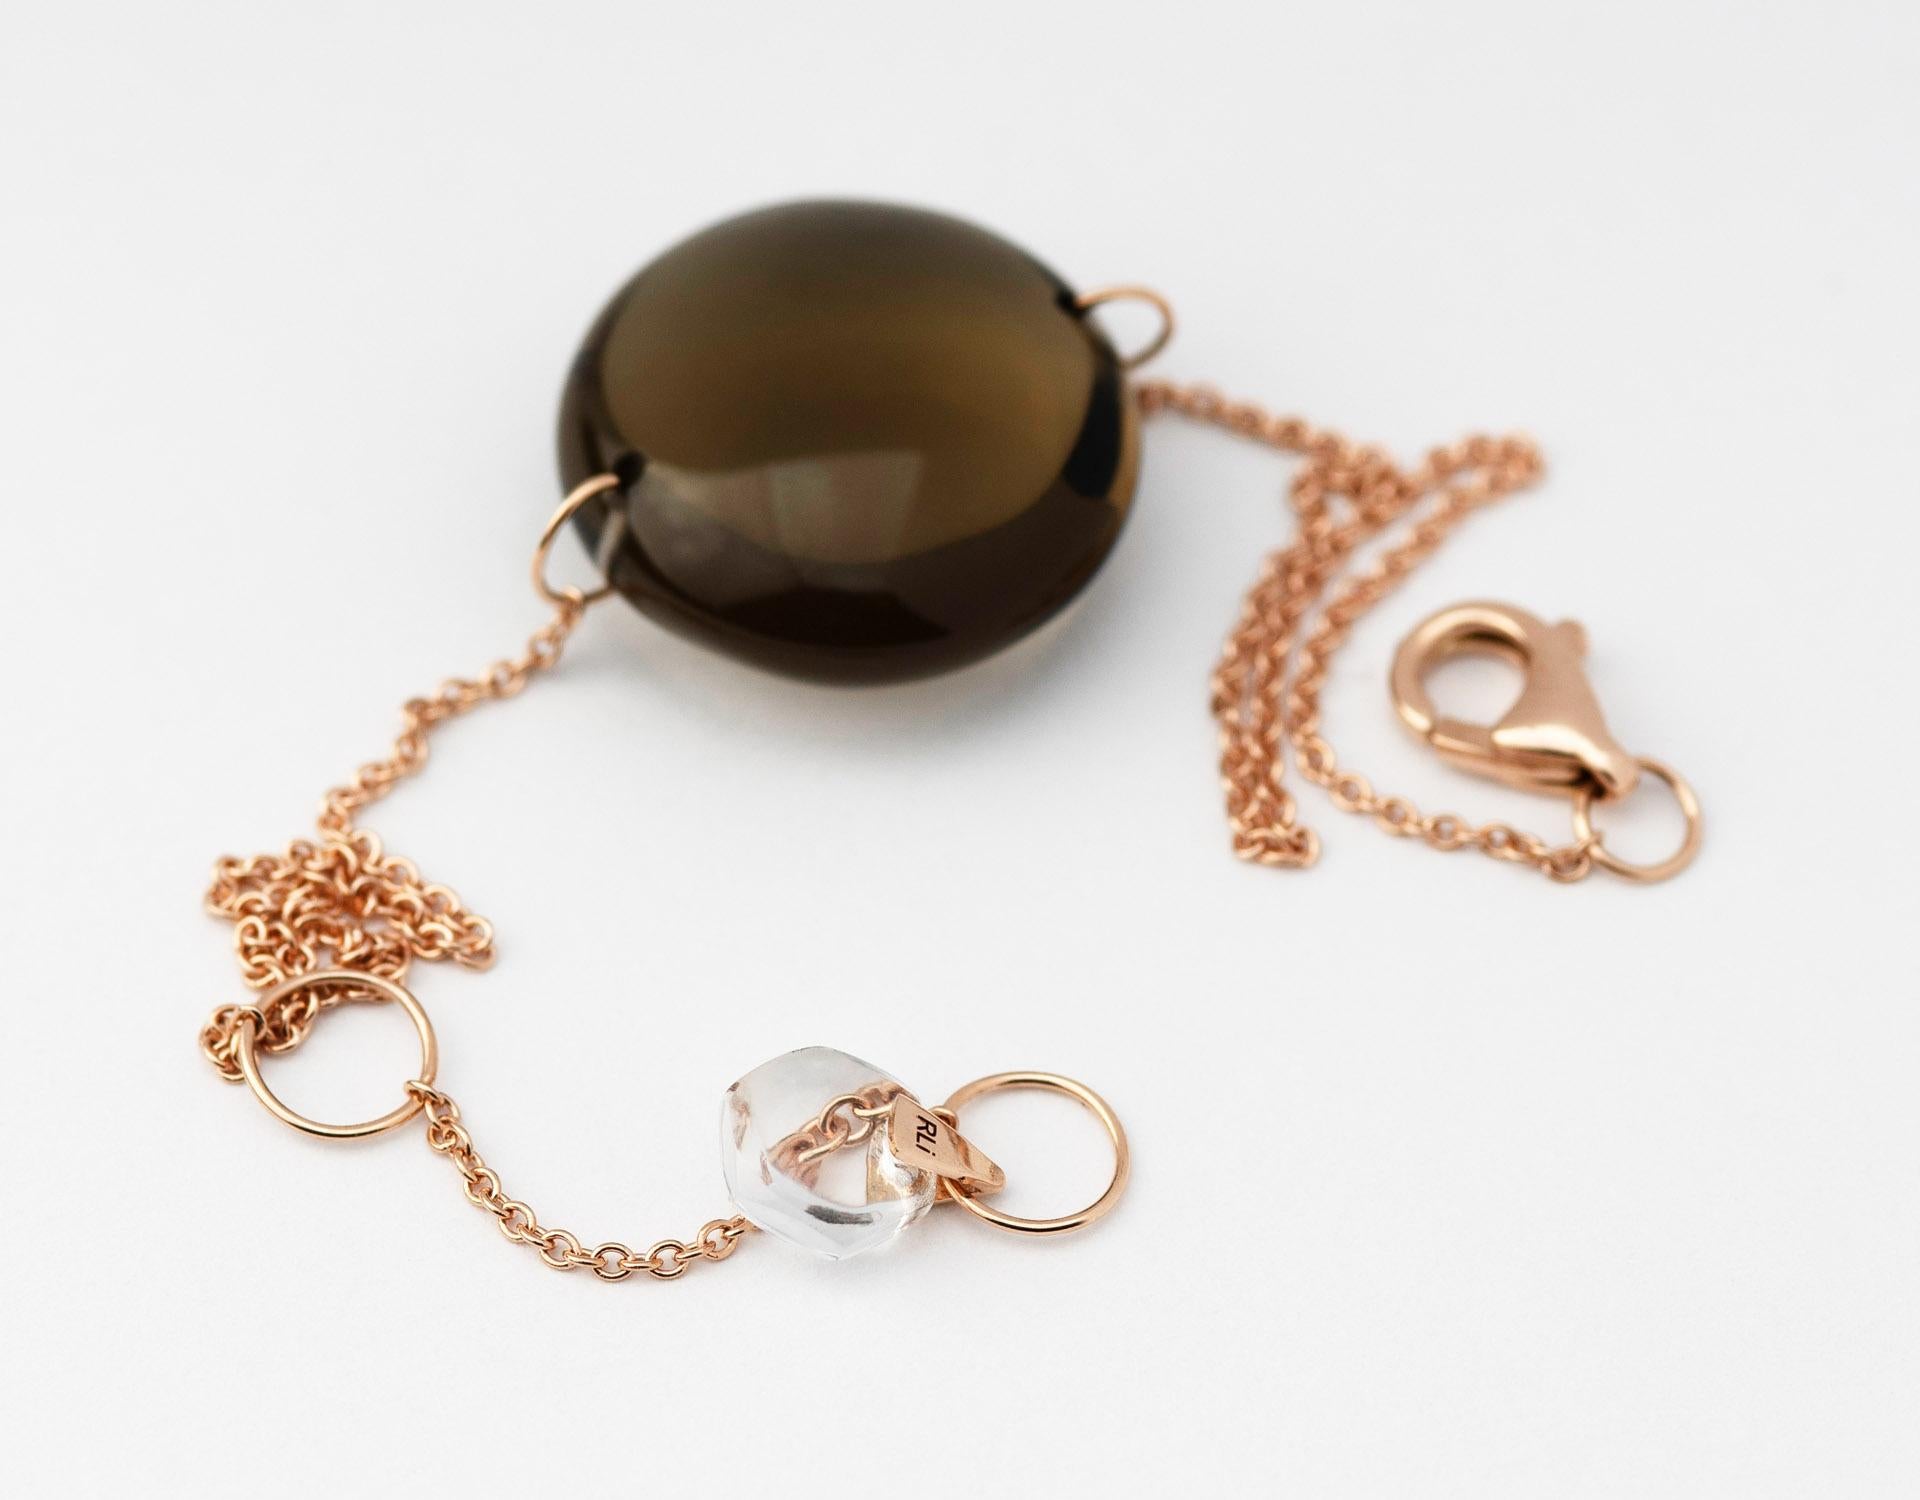 Rebecca Li designs Mindfulness. 

This minimum contemporary bracelet is from her Crystal Links Collection. Inspired by sacred geometry, it's designed to let us remember our power within. 
Miracles happen.

Smoky quartz means protection and